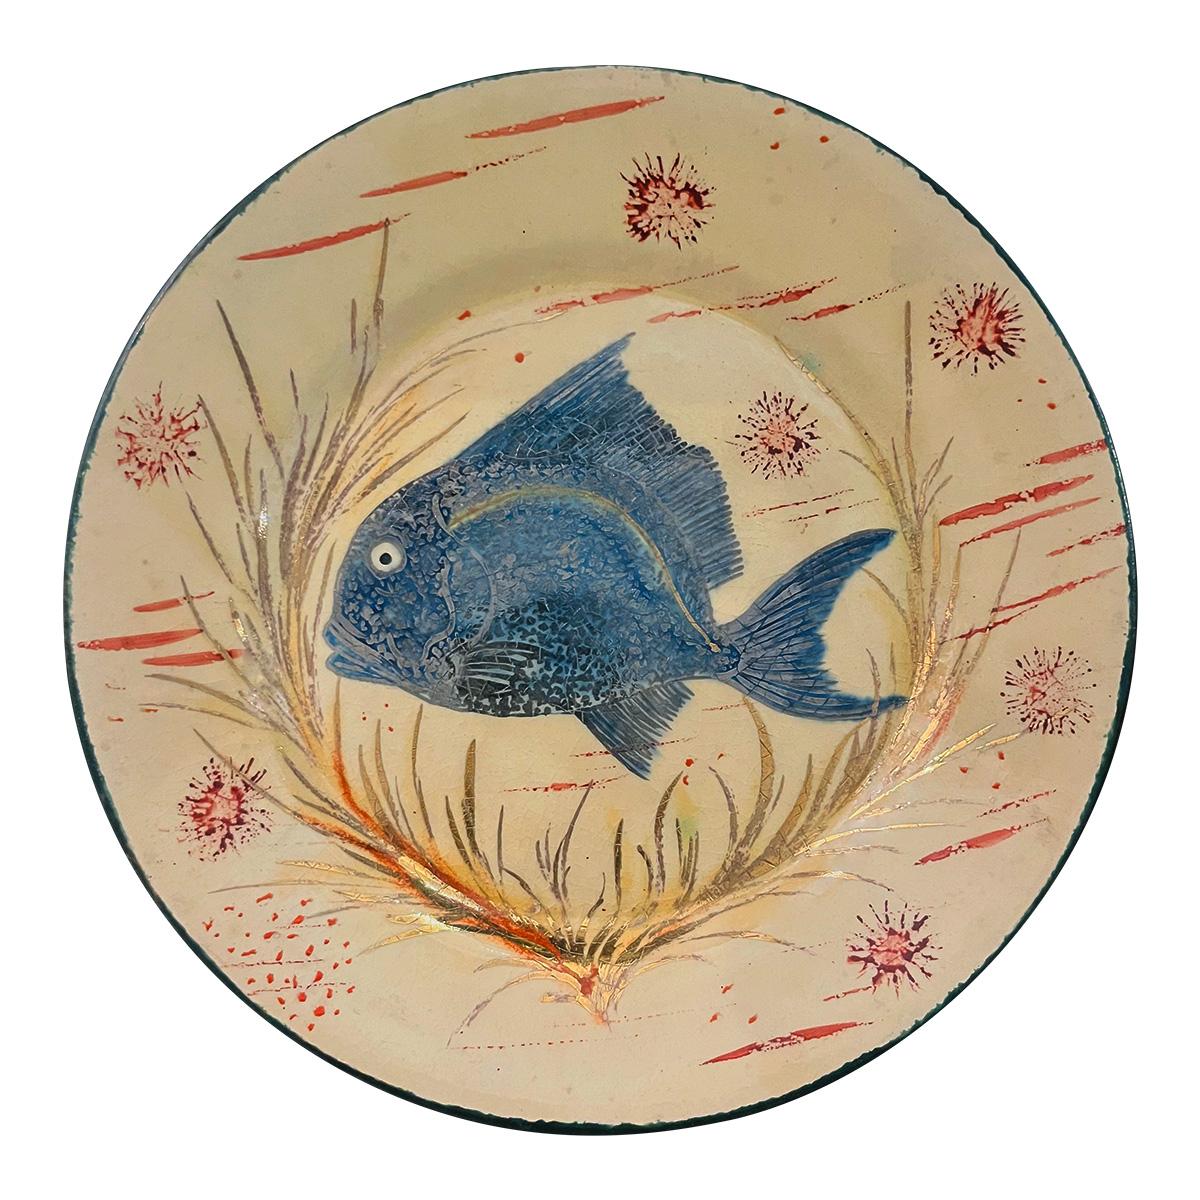 Set of 4 dinner plates, colored drawings with gold and silver highlights, enameled decoration of fish and seabed, green back. 
Set composed as follows:
- 1 plate with a blue fish, silver and red seaweed
- 1 plate with blue, brown and green fish,